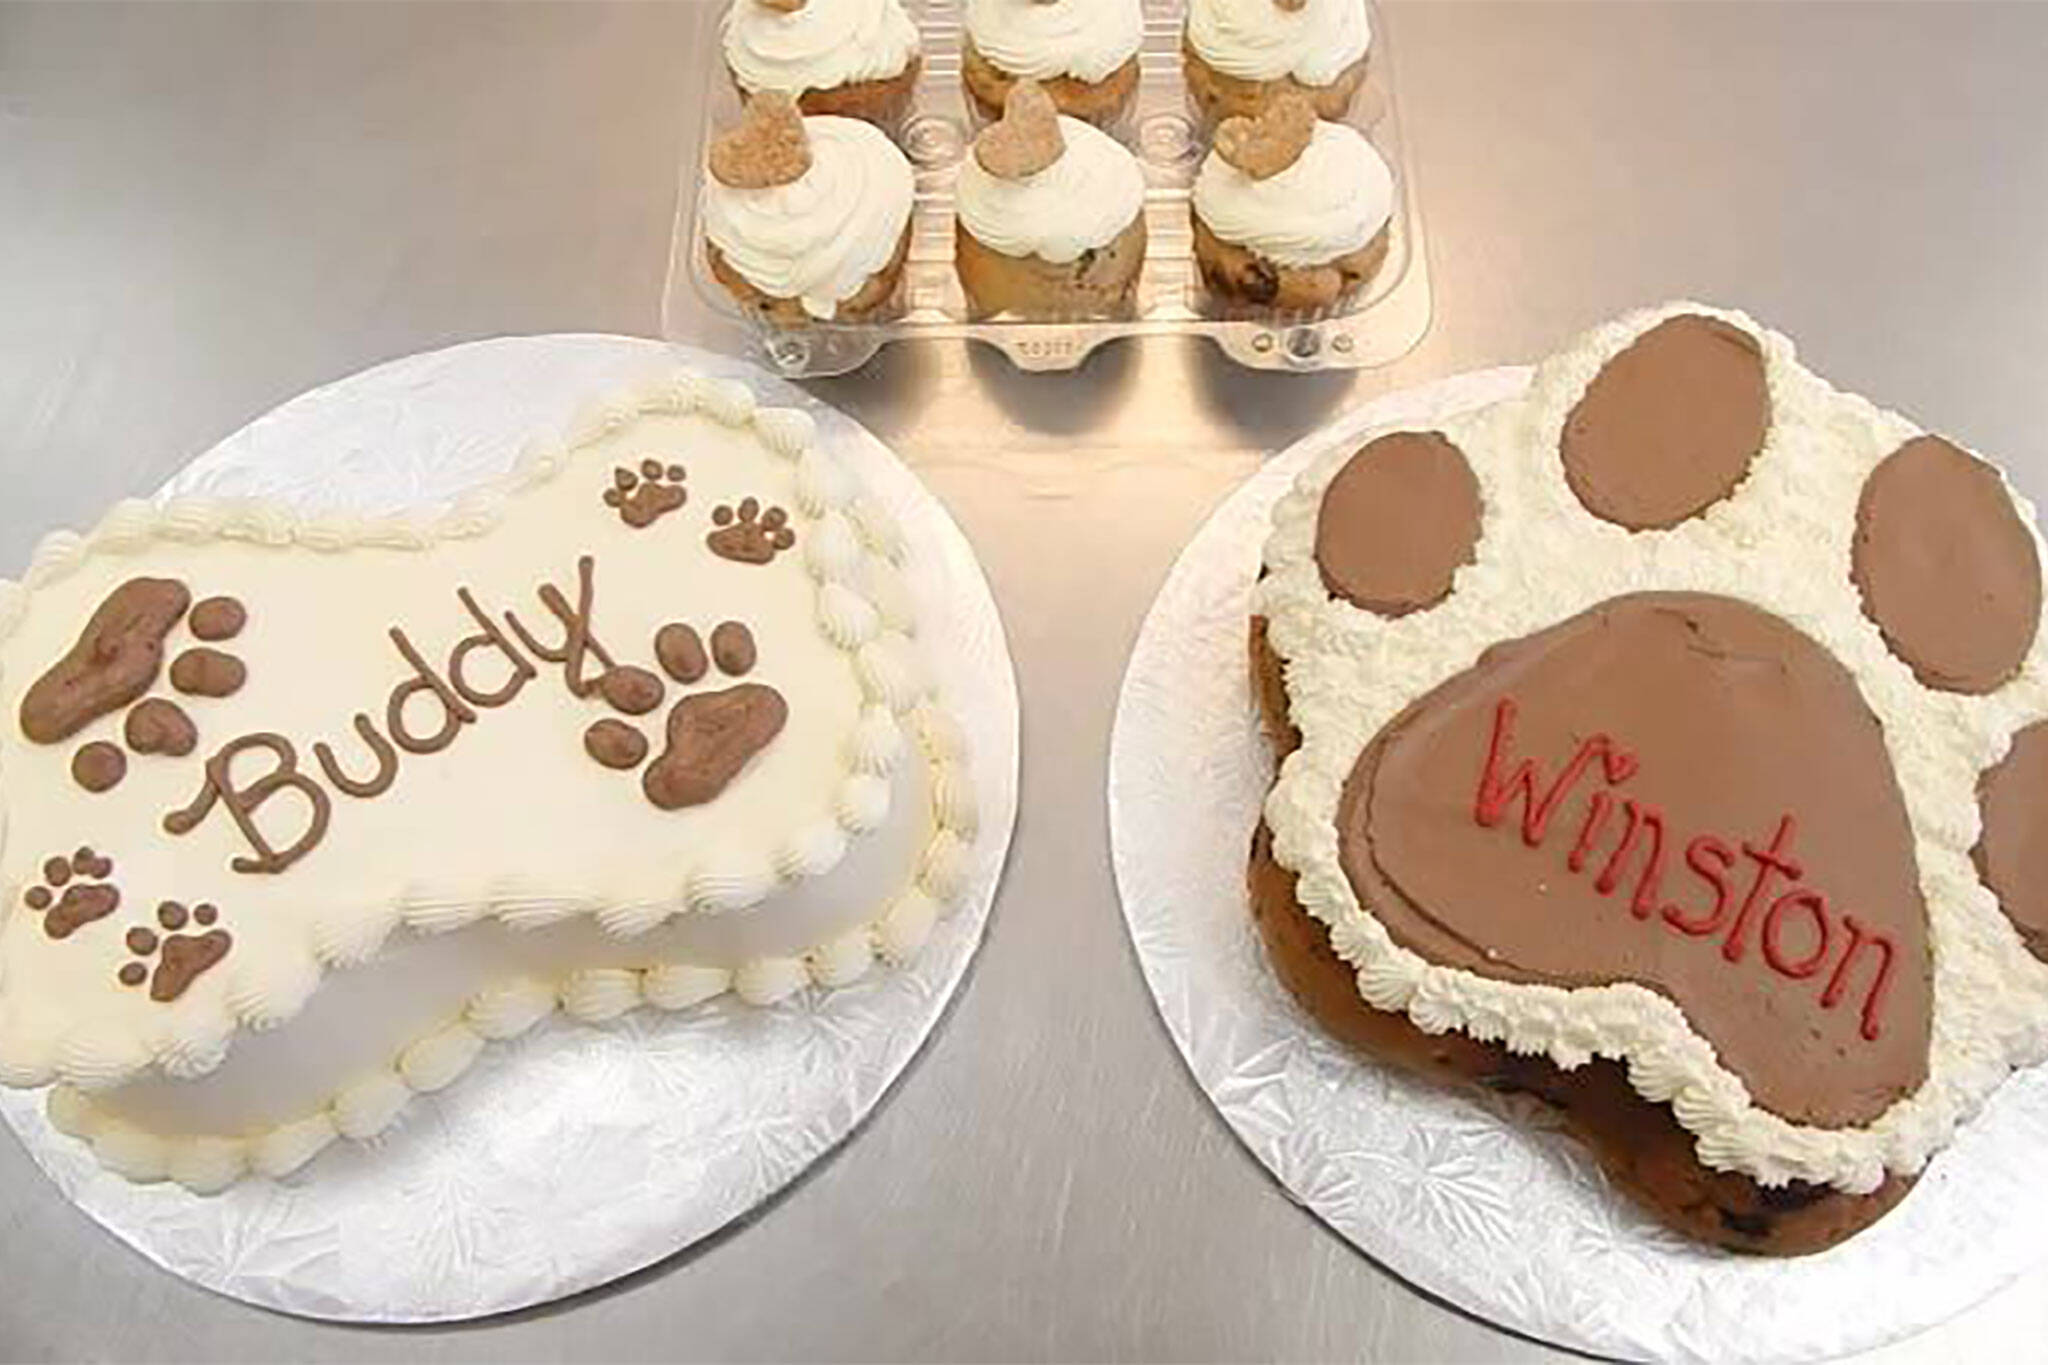 Toronto can't stop buying cakes and cupcakes for their dogs